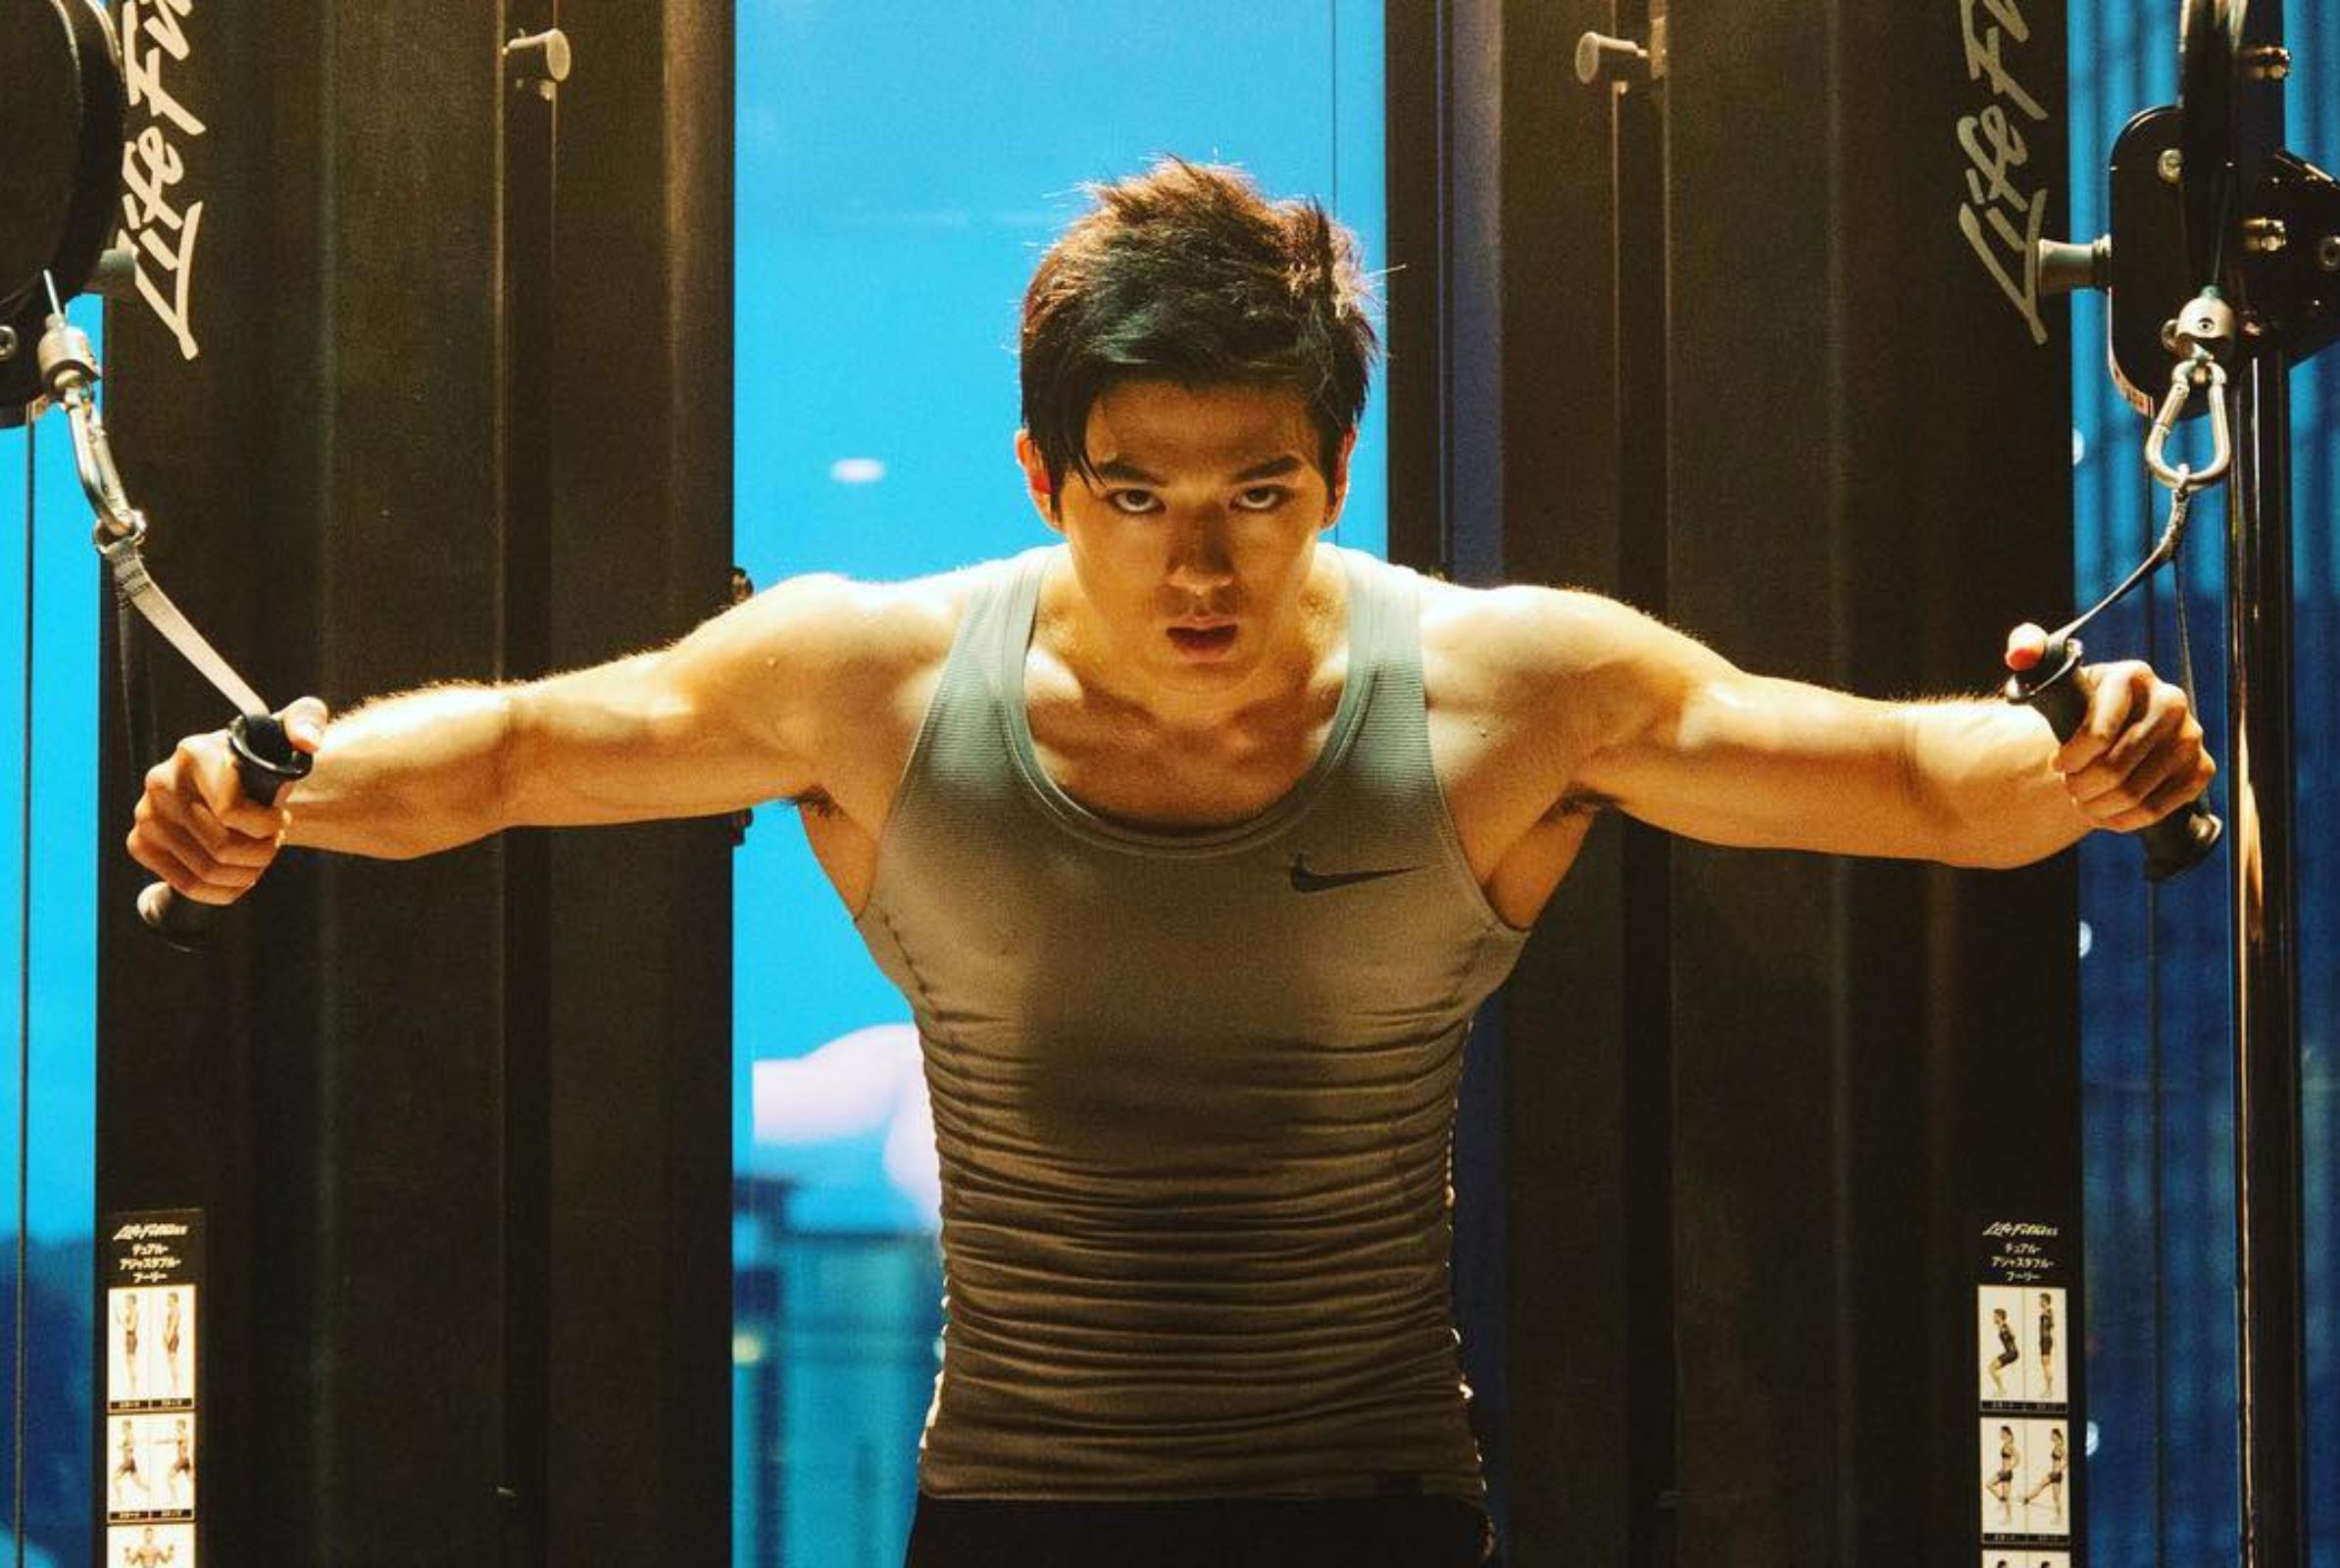 The One Piece actor's fitness routine